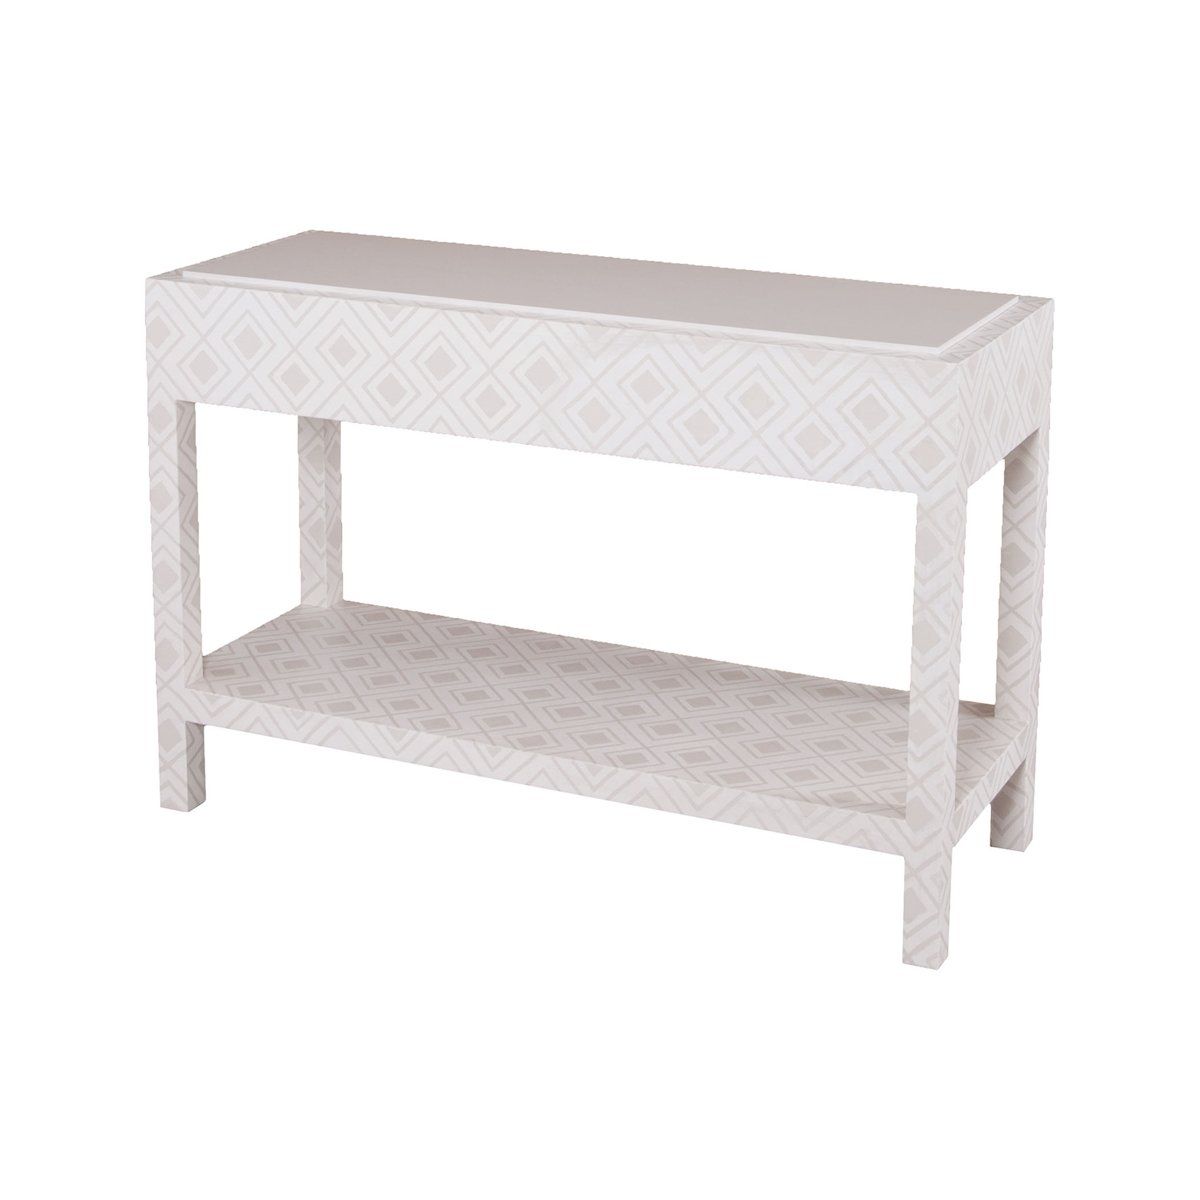 Kent Fabric Wrapped Console | Products In 2018 | Pinterest Regarding Parsons Travertine Top &amp; Elm Base 48x16 Console Tables (View 5 of 30)